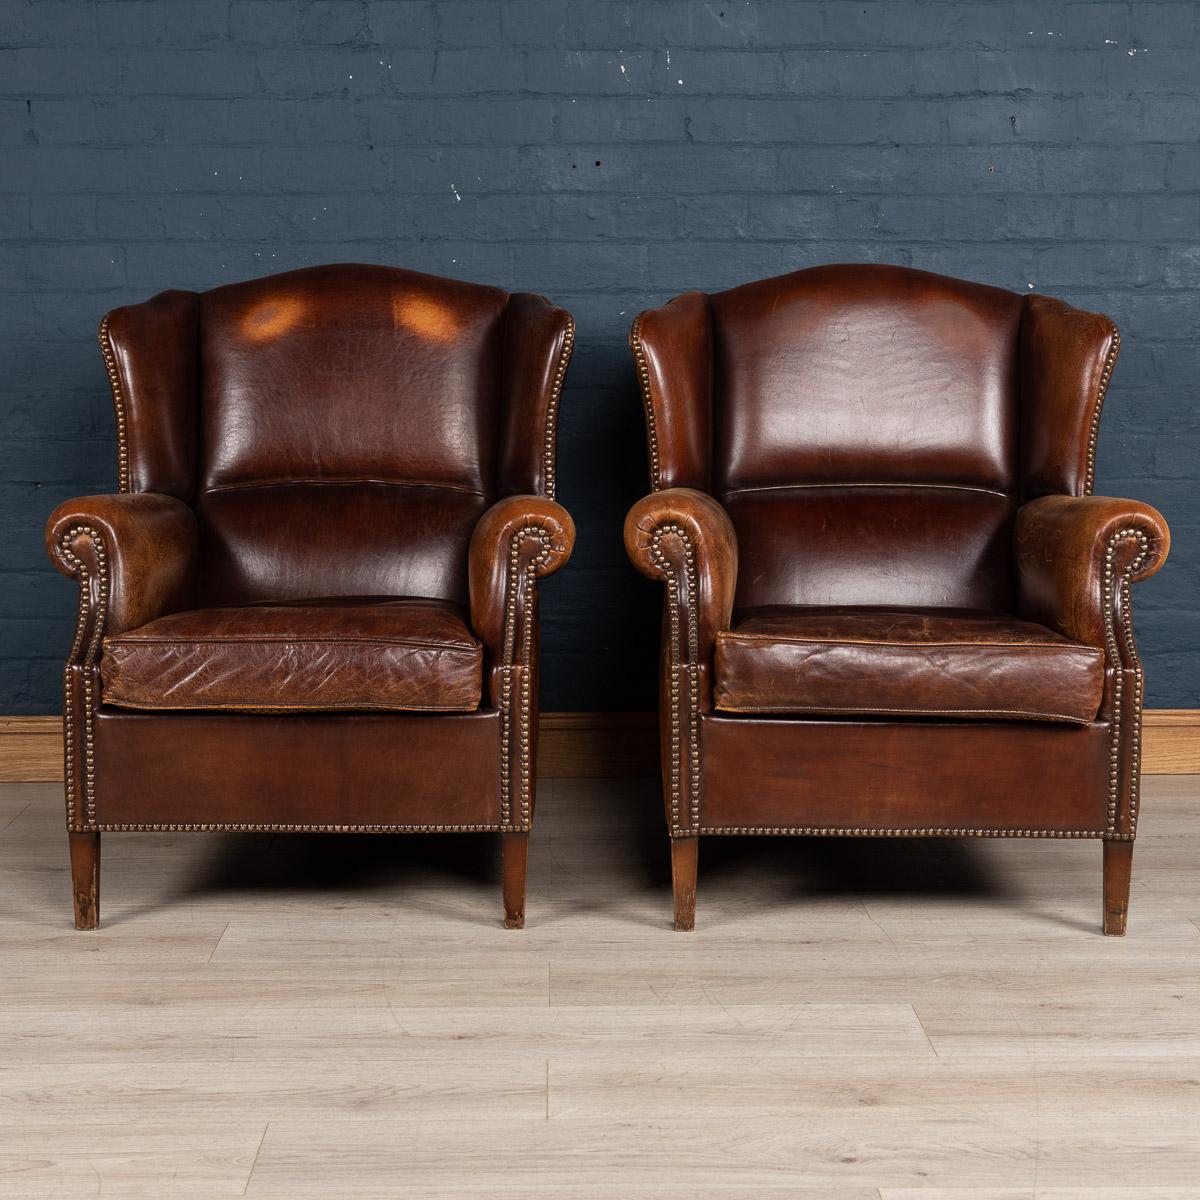 A wonderful pair of leather wing back armchairs. Dating to the late 20th century these chairs were realised by the finest Dutch craftsmen, the solid wood frame upholstered in superb quality leather which over the years have only gained in class and